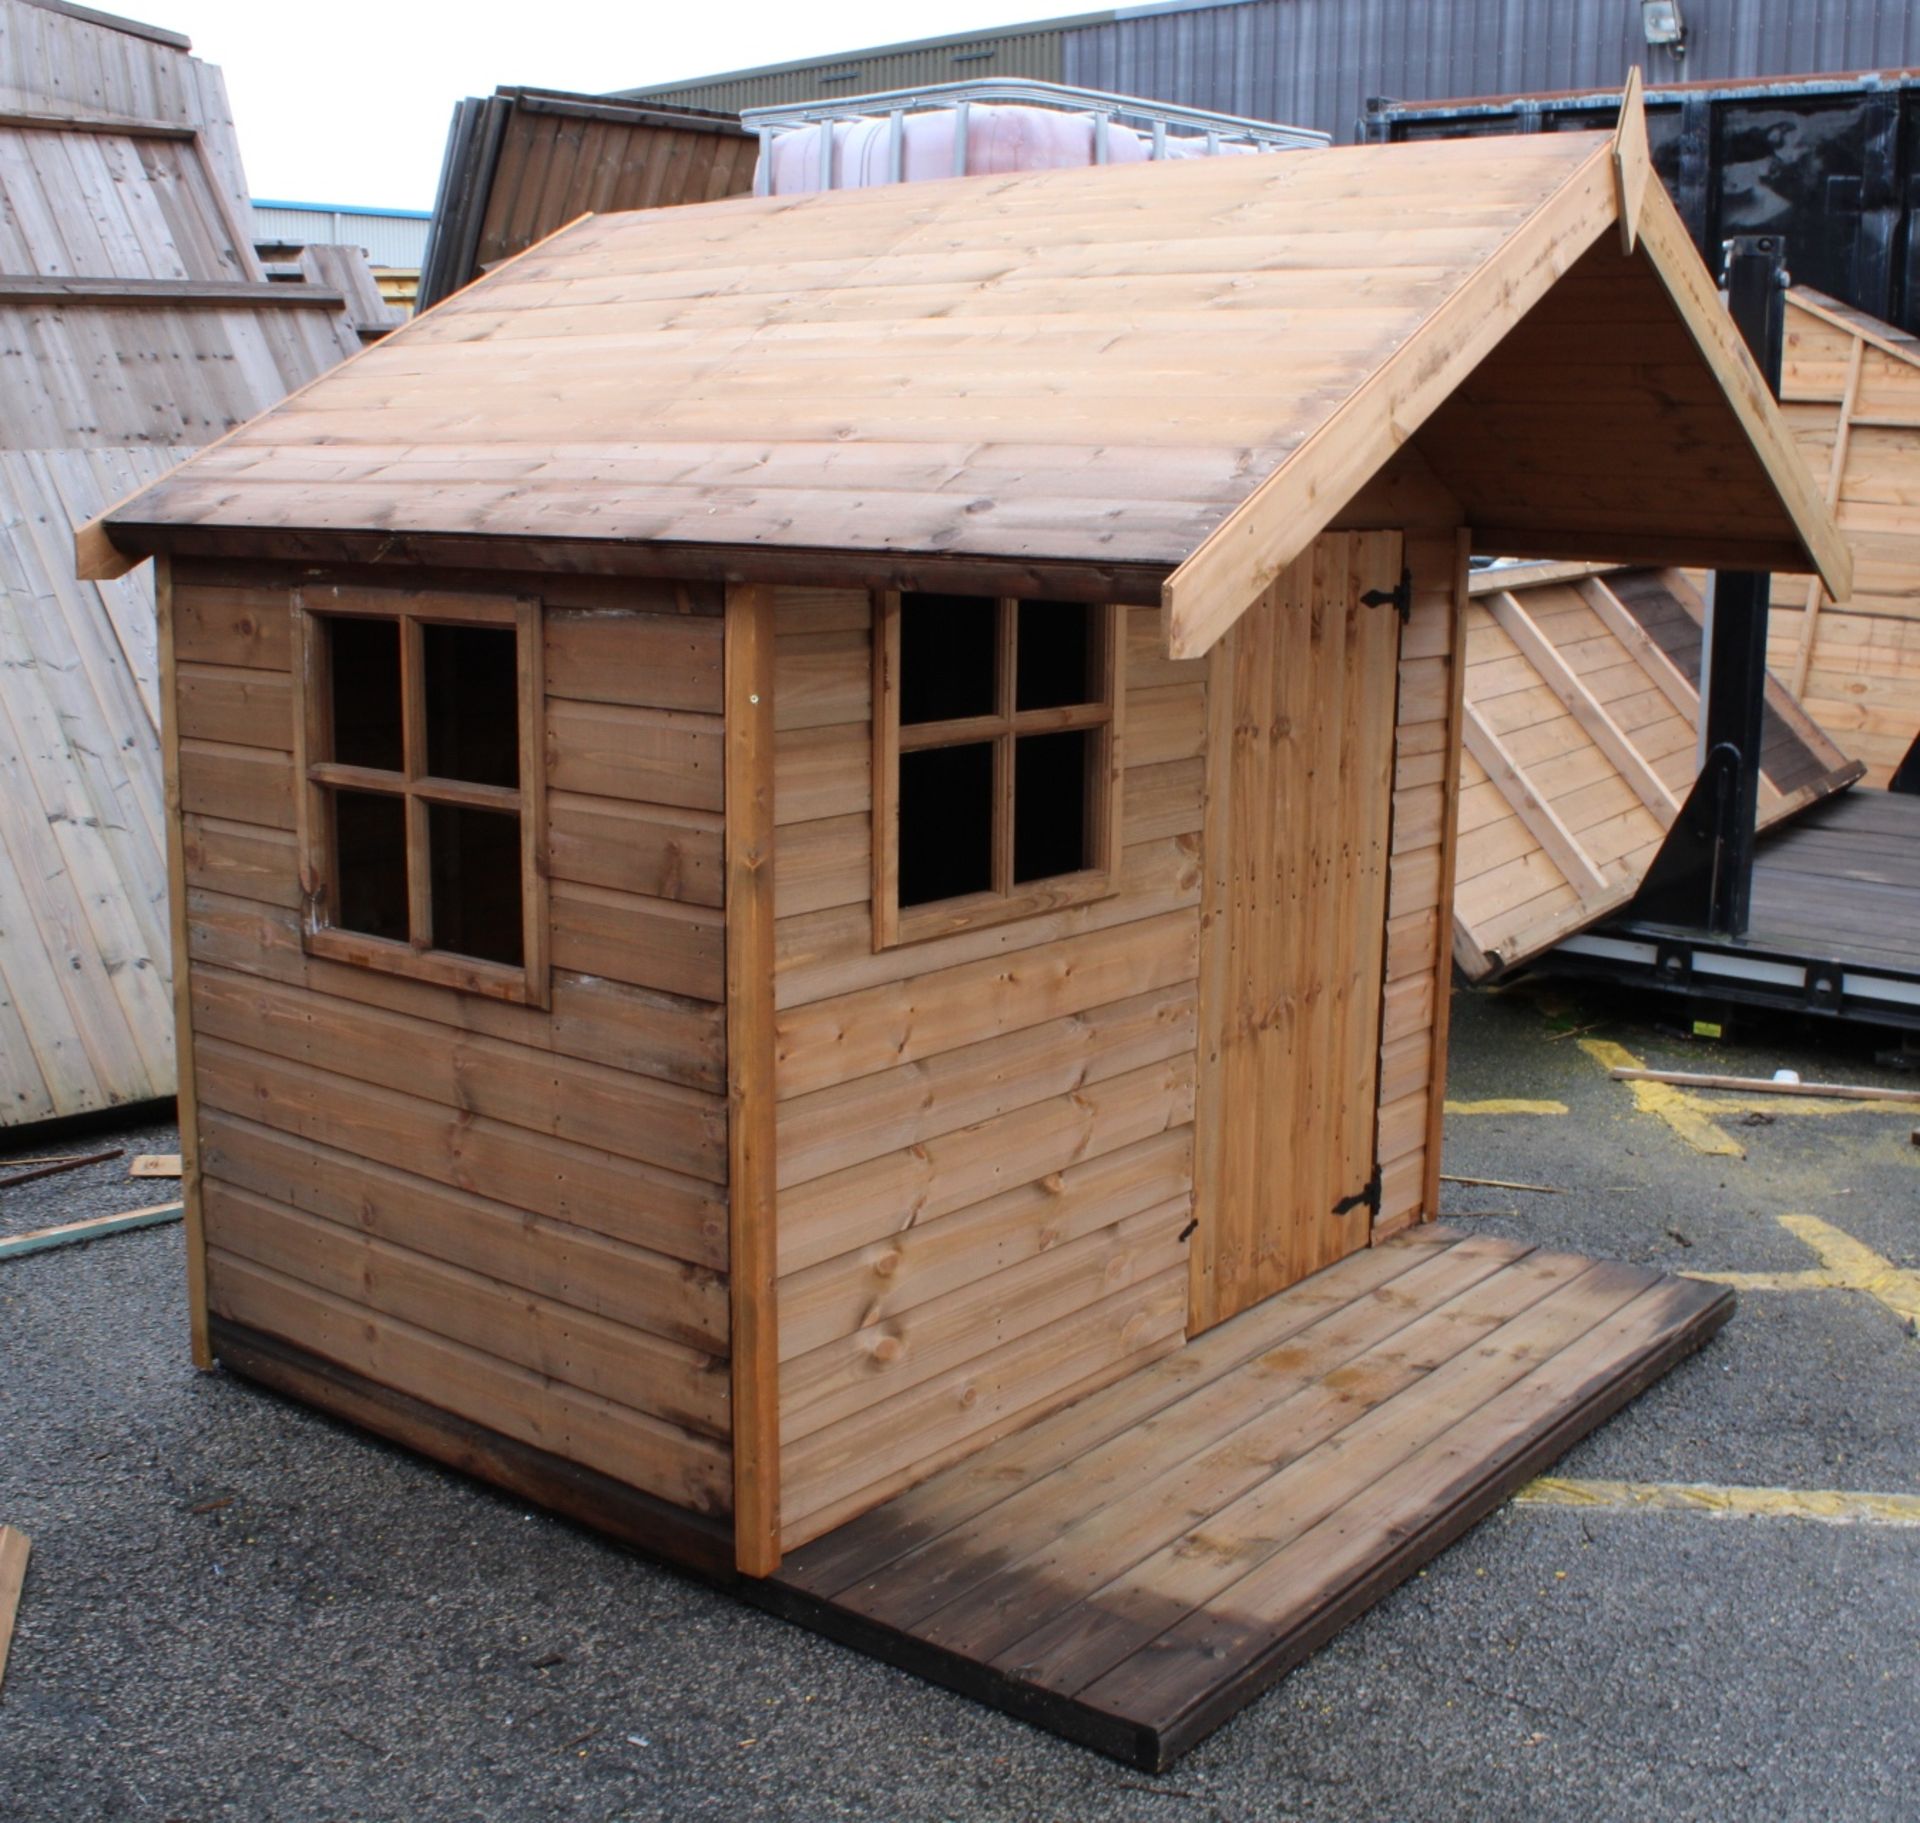 4x6 kids playhouse with overhang and veranda, Stnadrad 16mm Nominal Cladding - Image 5 of 5